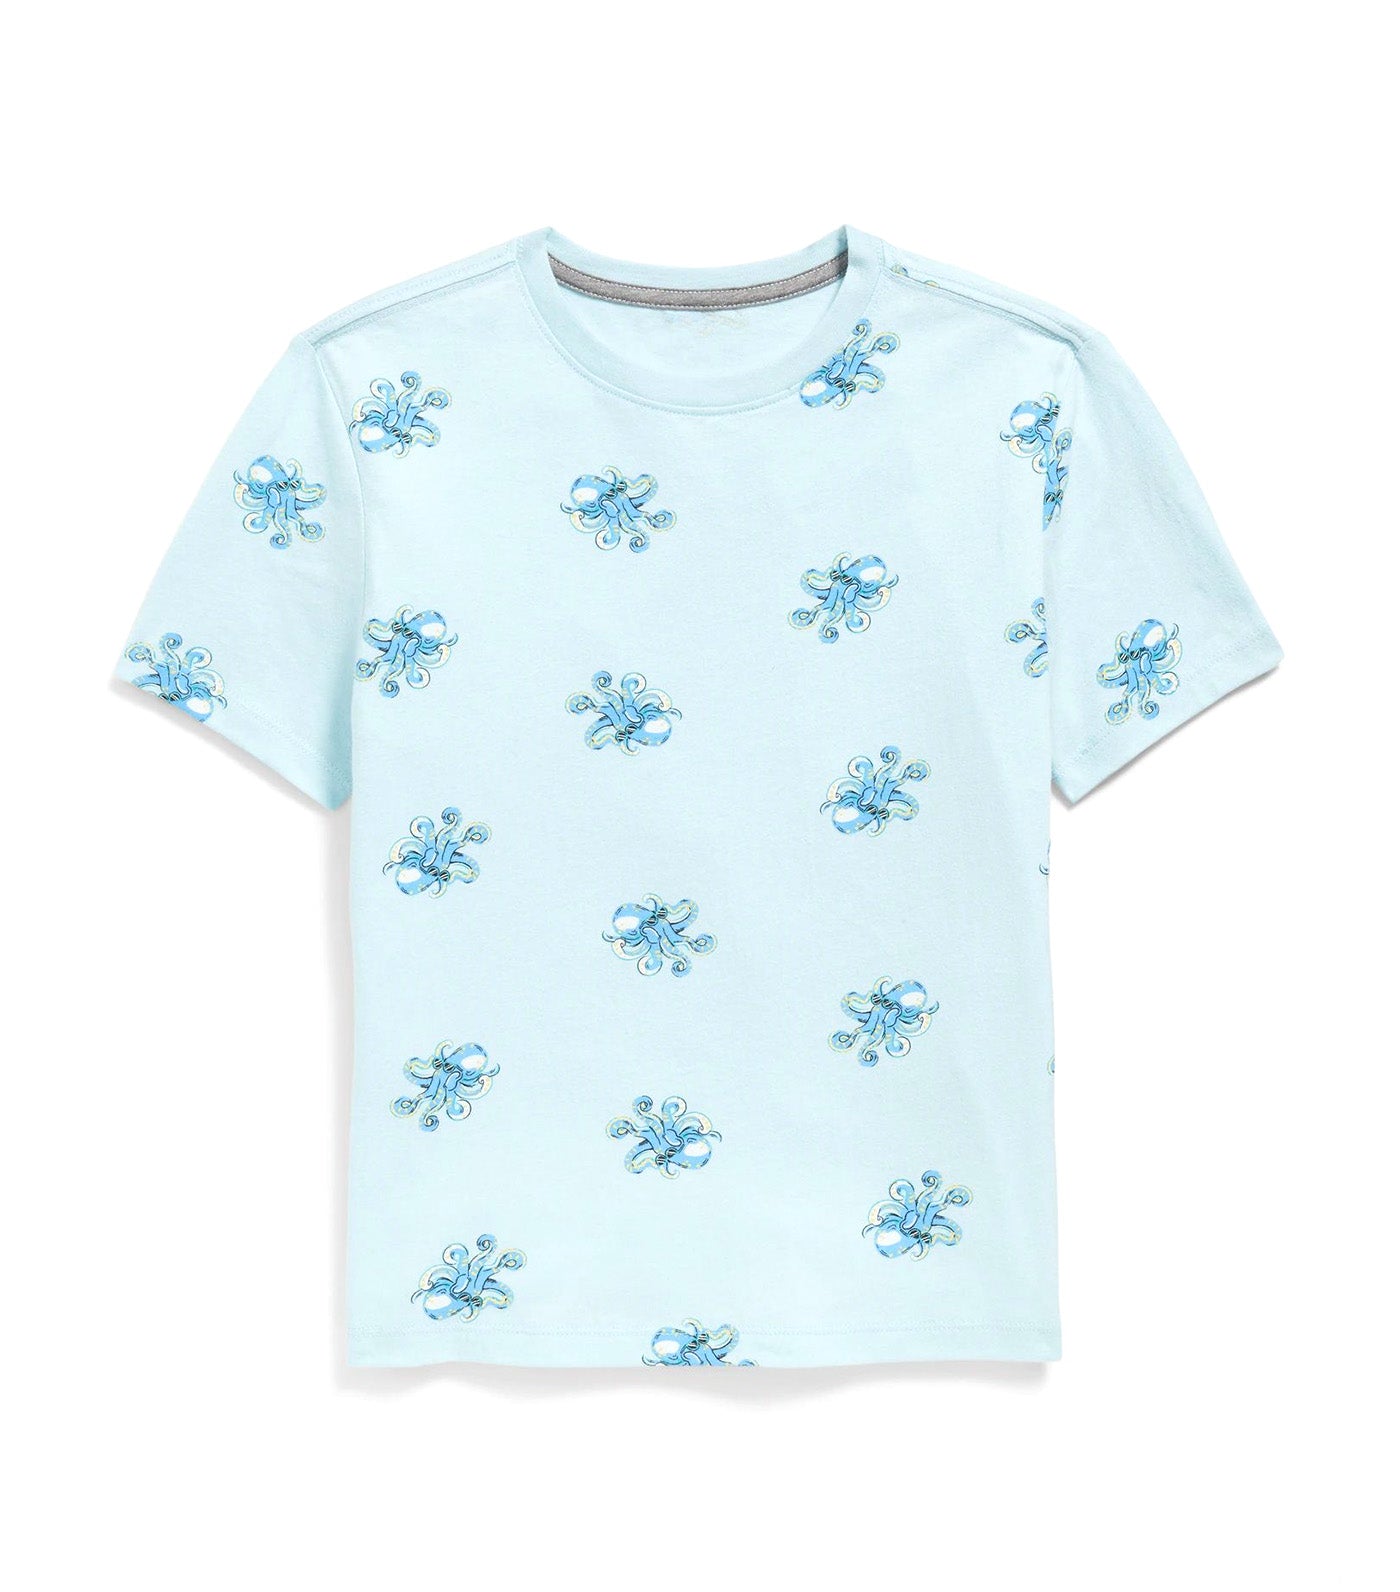 Softest Printed Crew-Neck T-Shirt for Boys Octopus